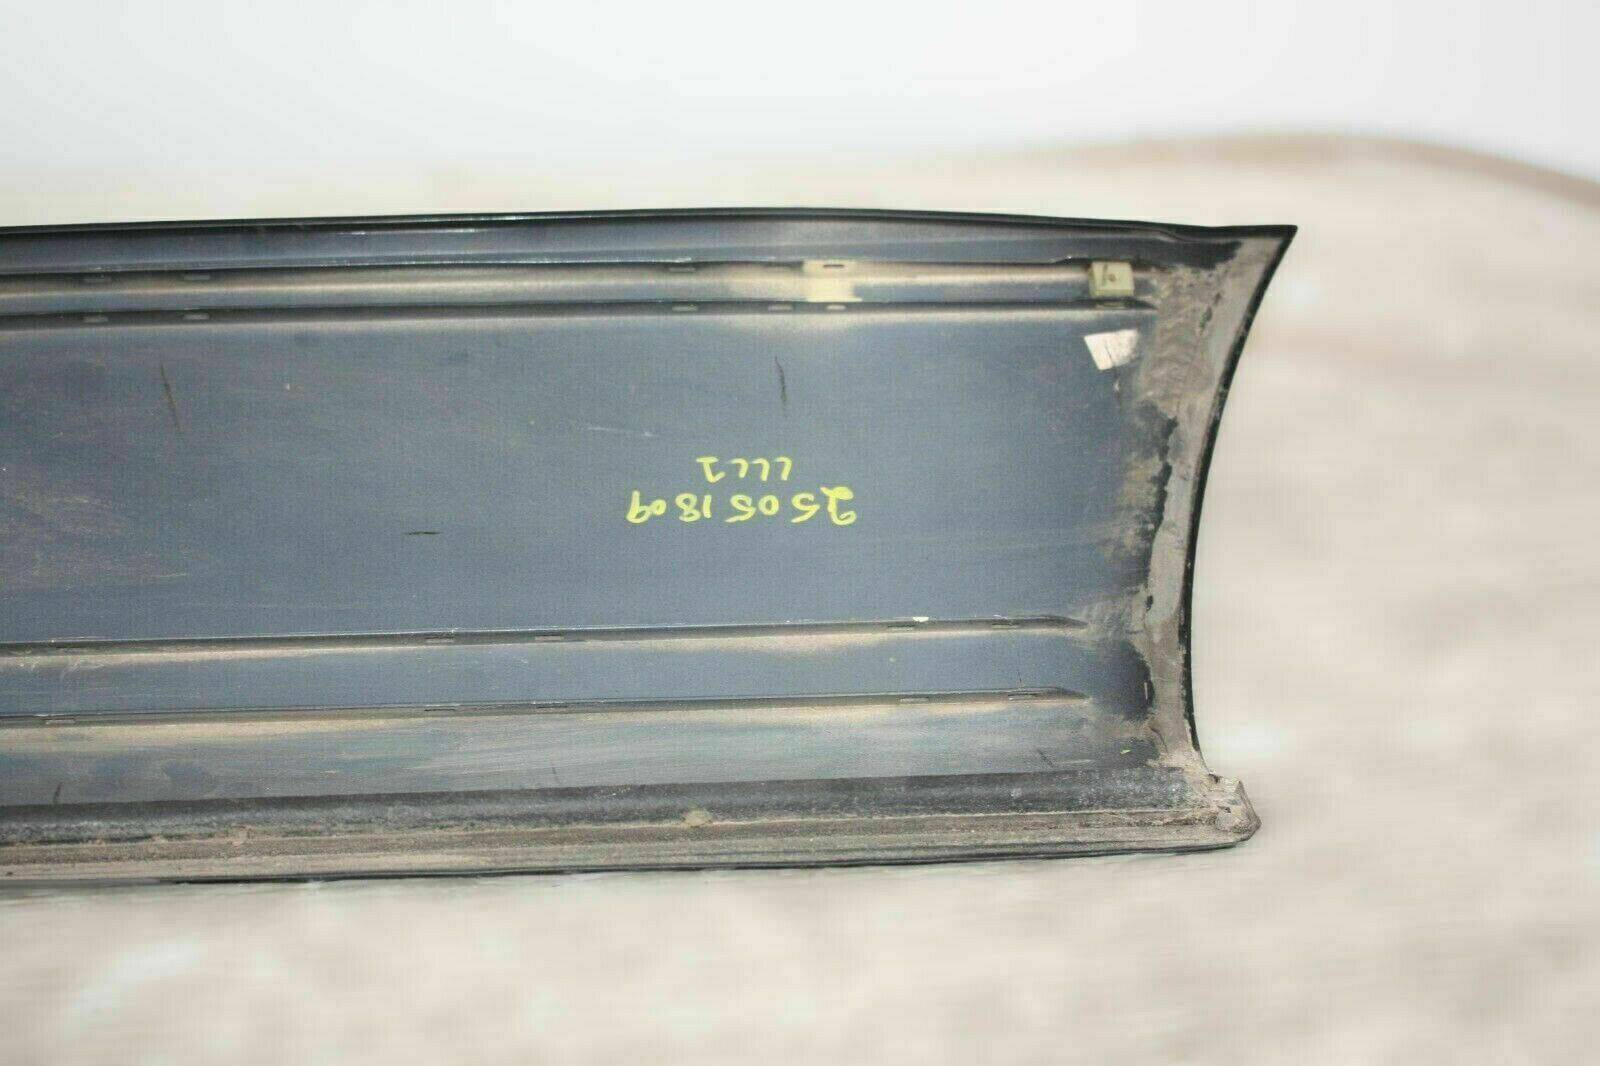 RANGE-ROVER-REAR-RIGHT-DOOR-LOWER-MOULDING-TRIM-2002-TO-2005-175430920194-8